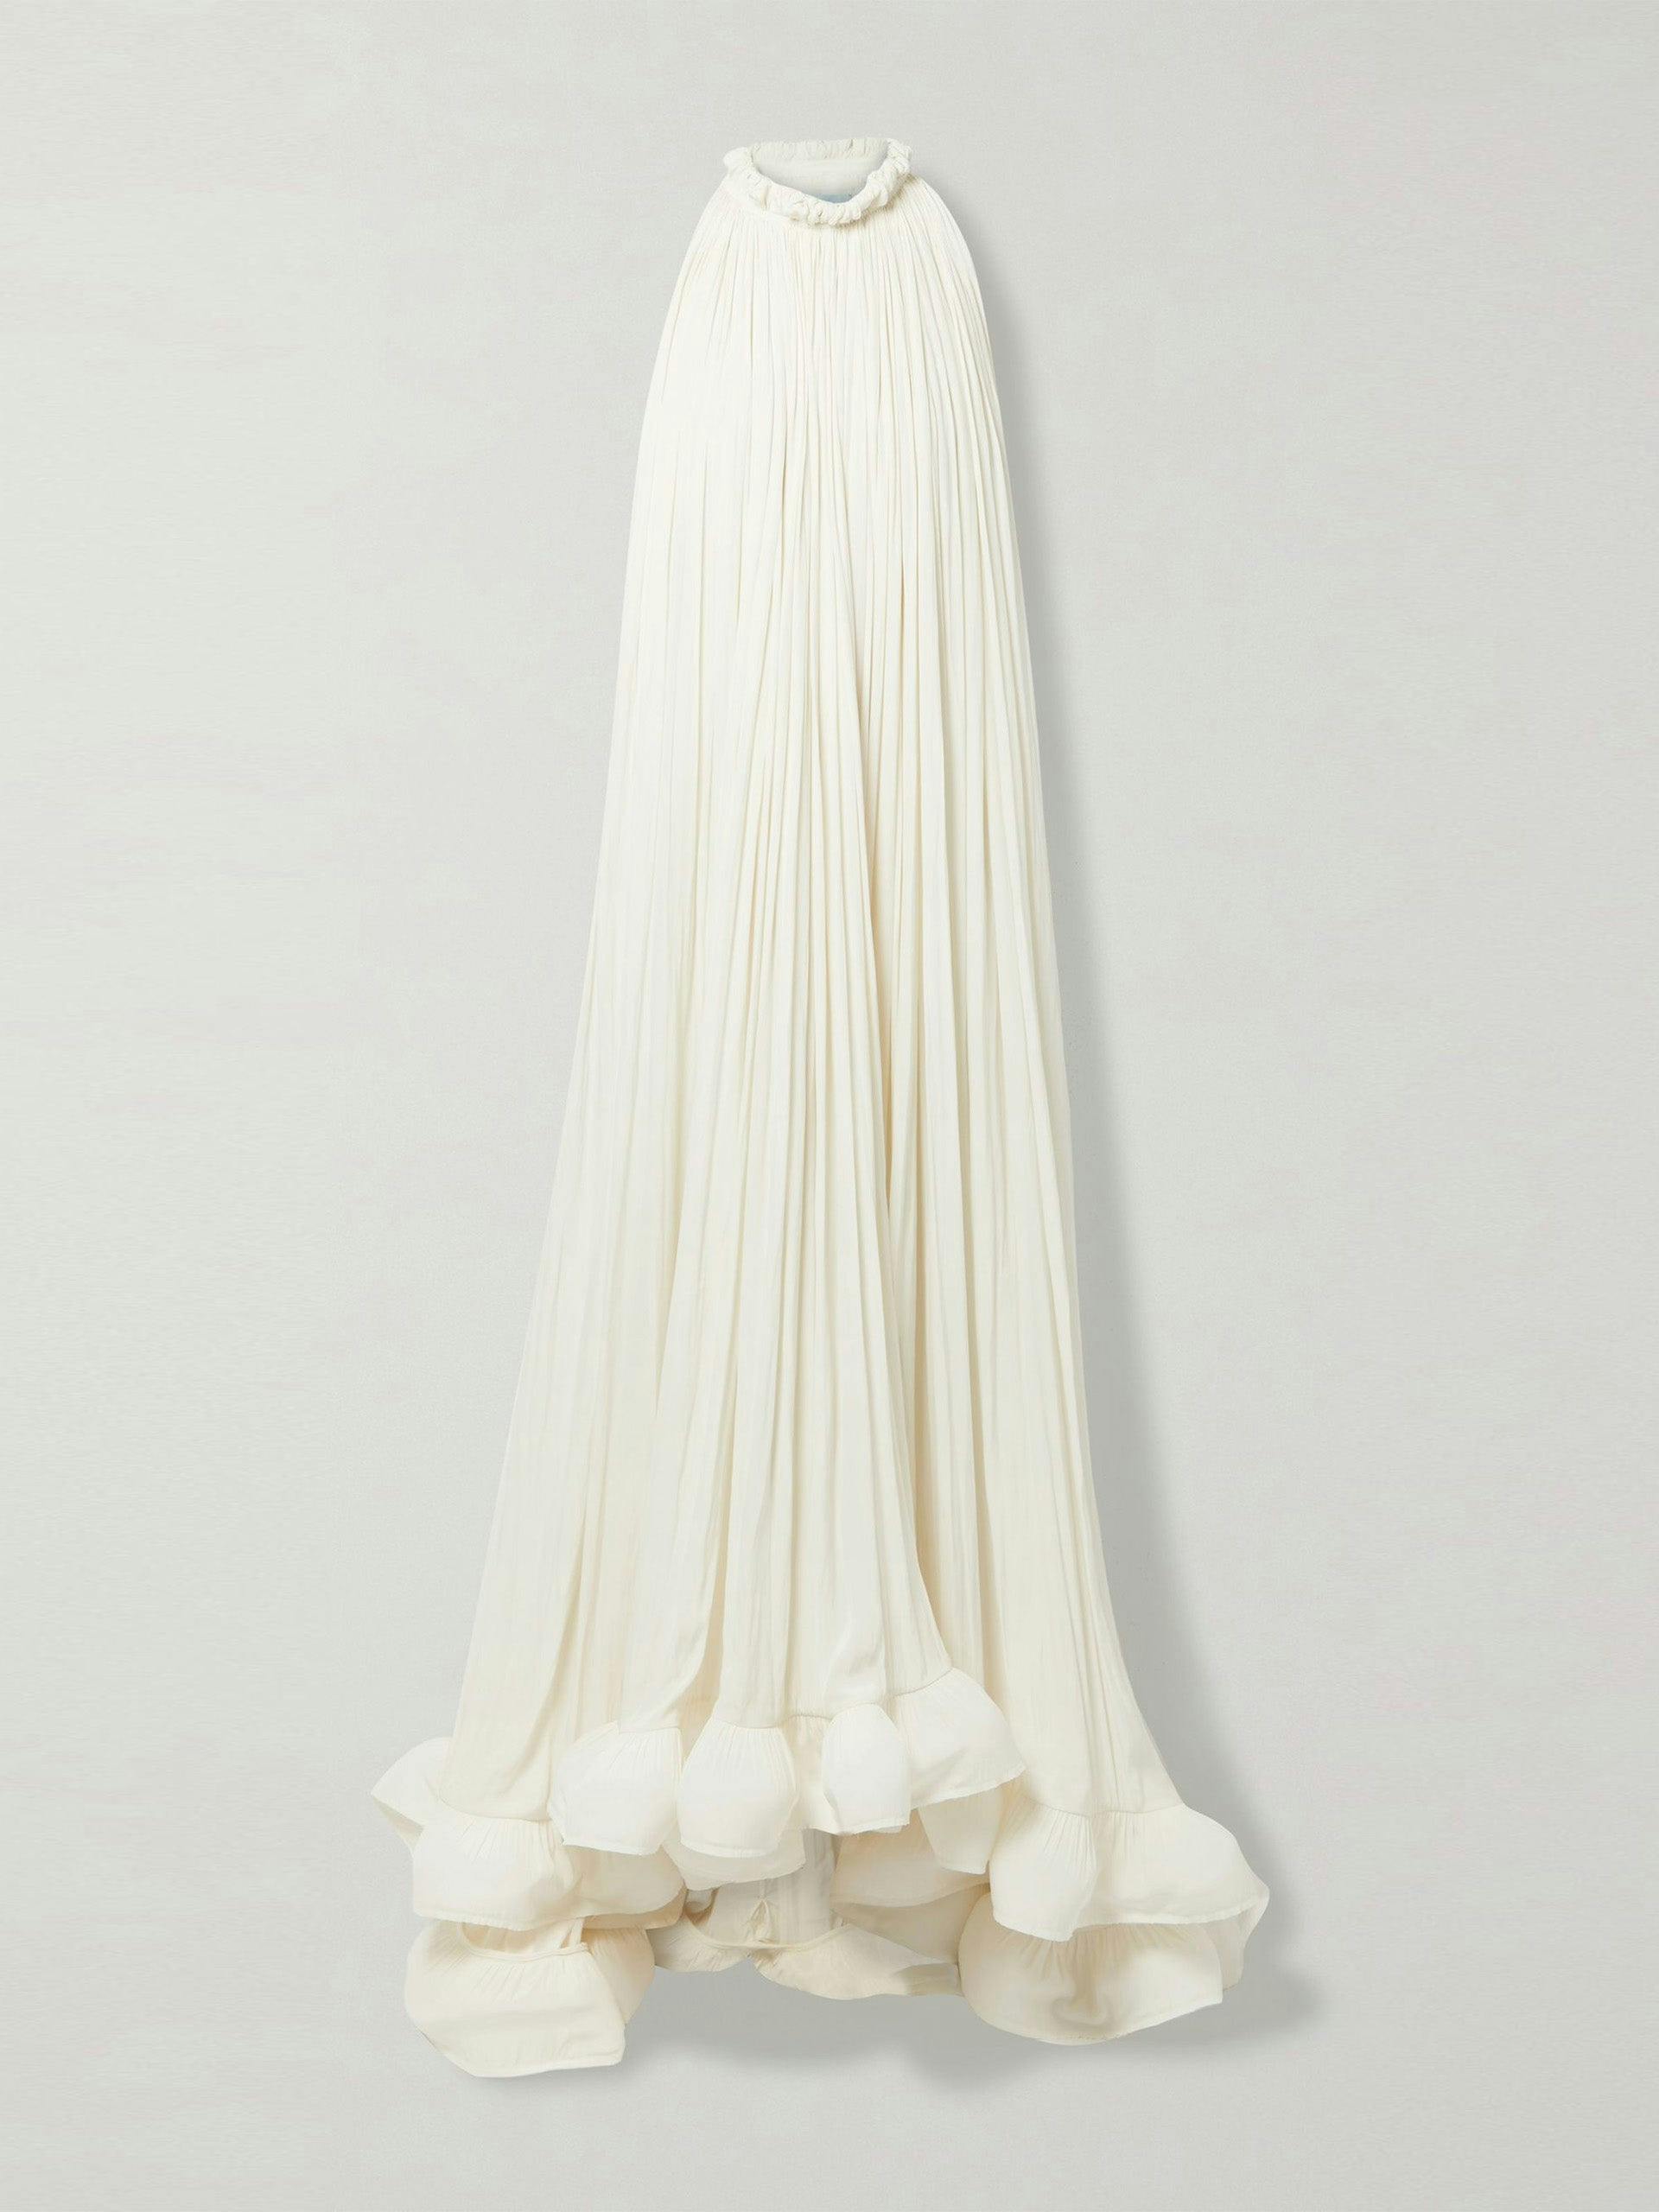 Ruffled charmeuse gown